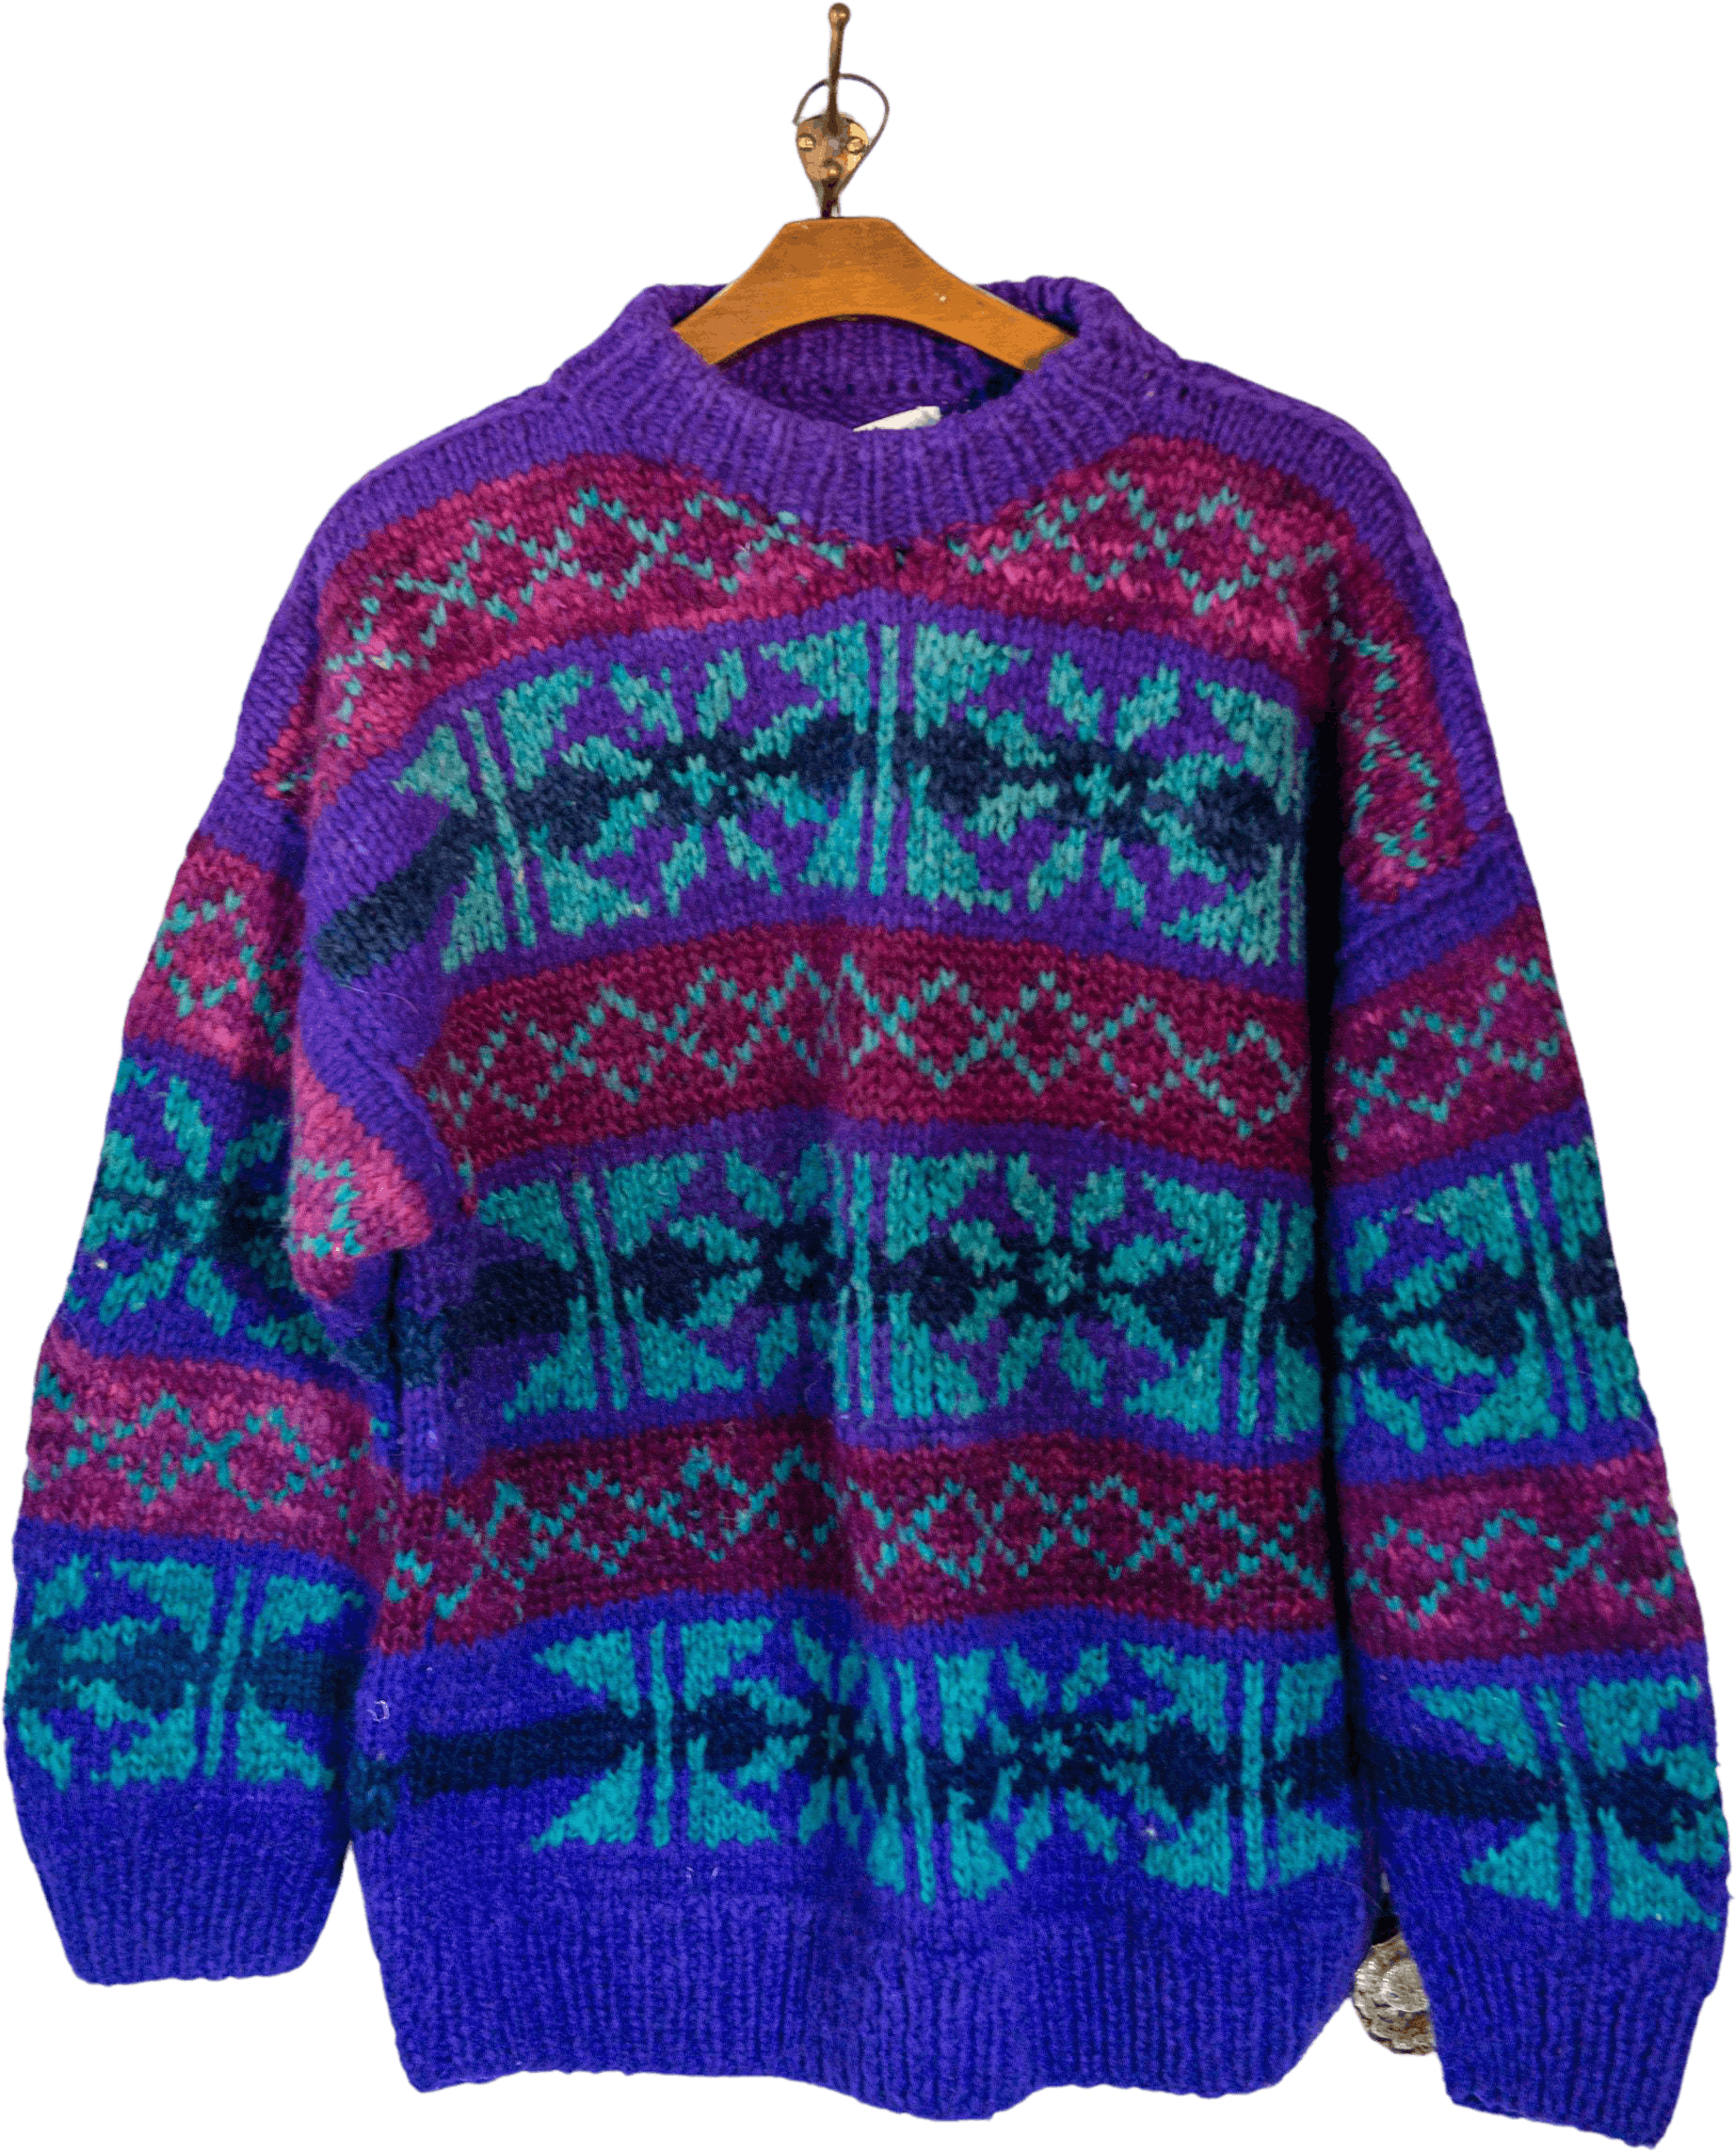 Vintage Purple Handmade Knit Wool Sweater by World Class | Shop THRILLING